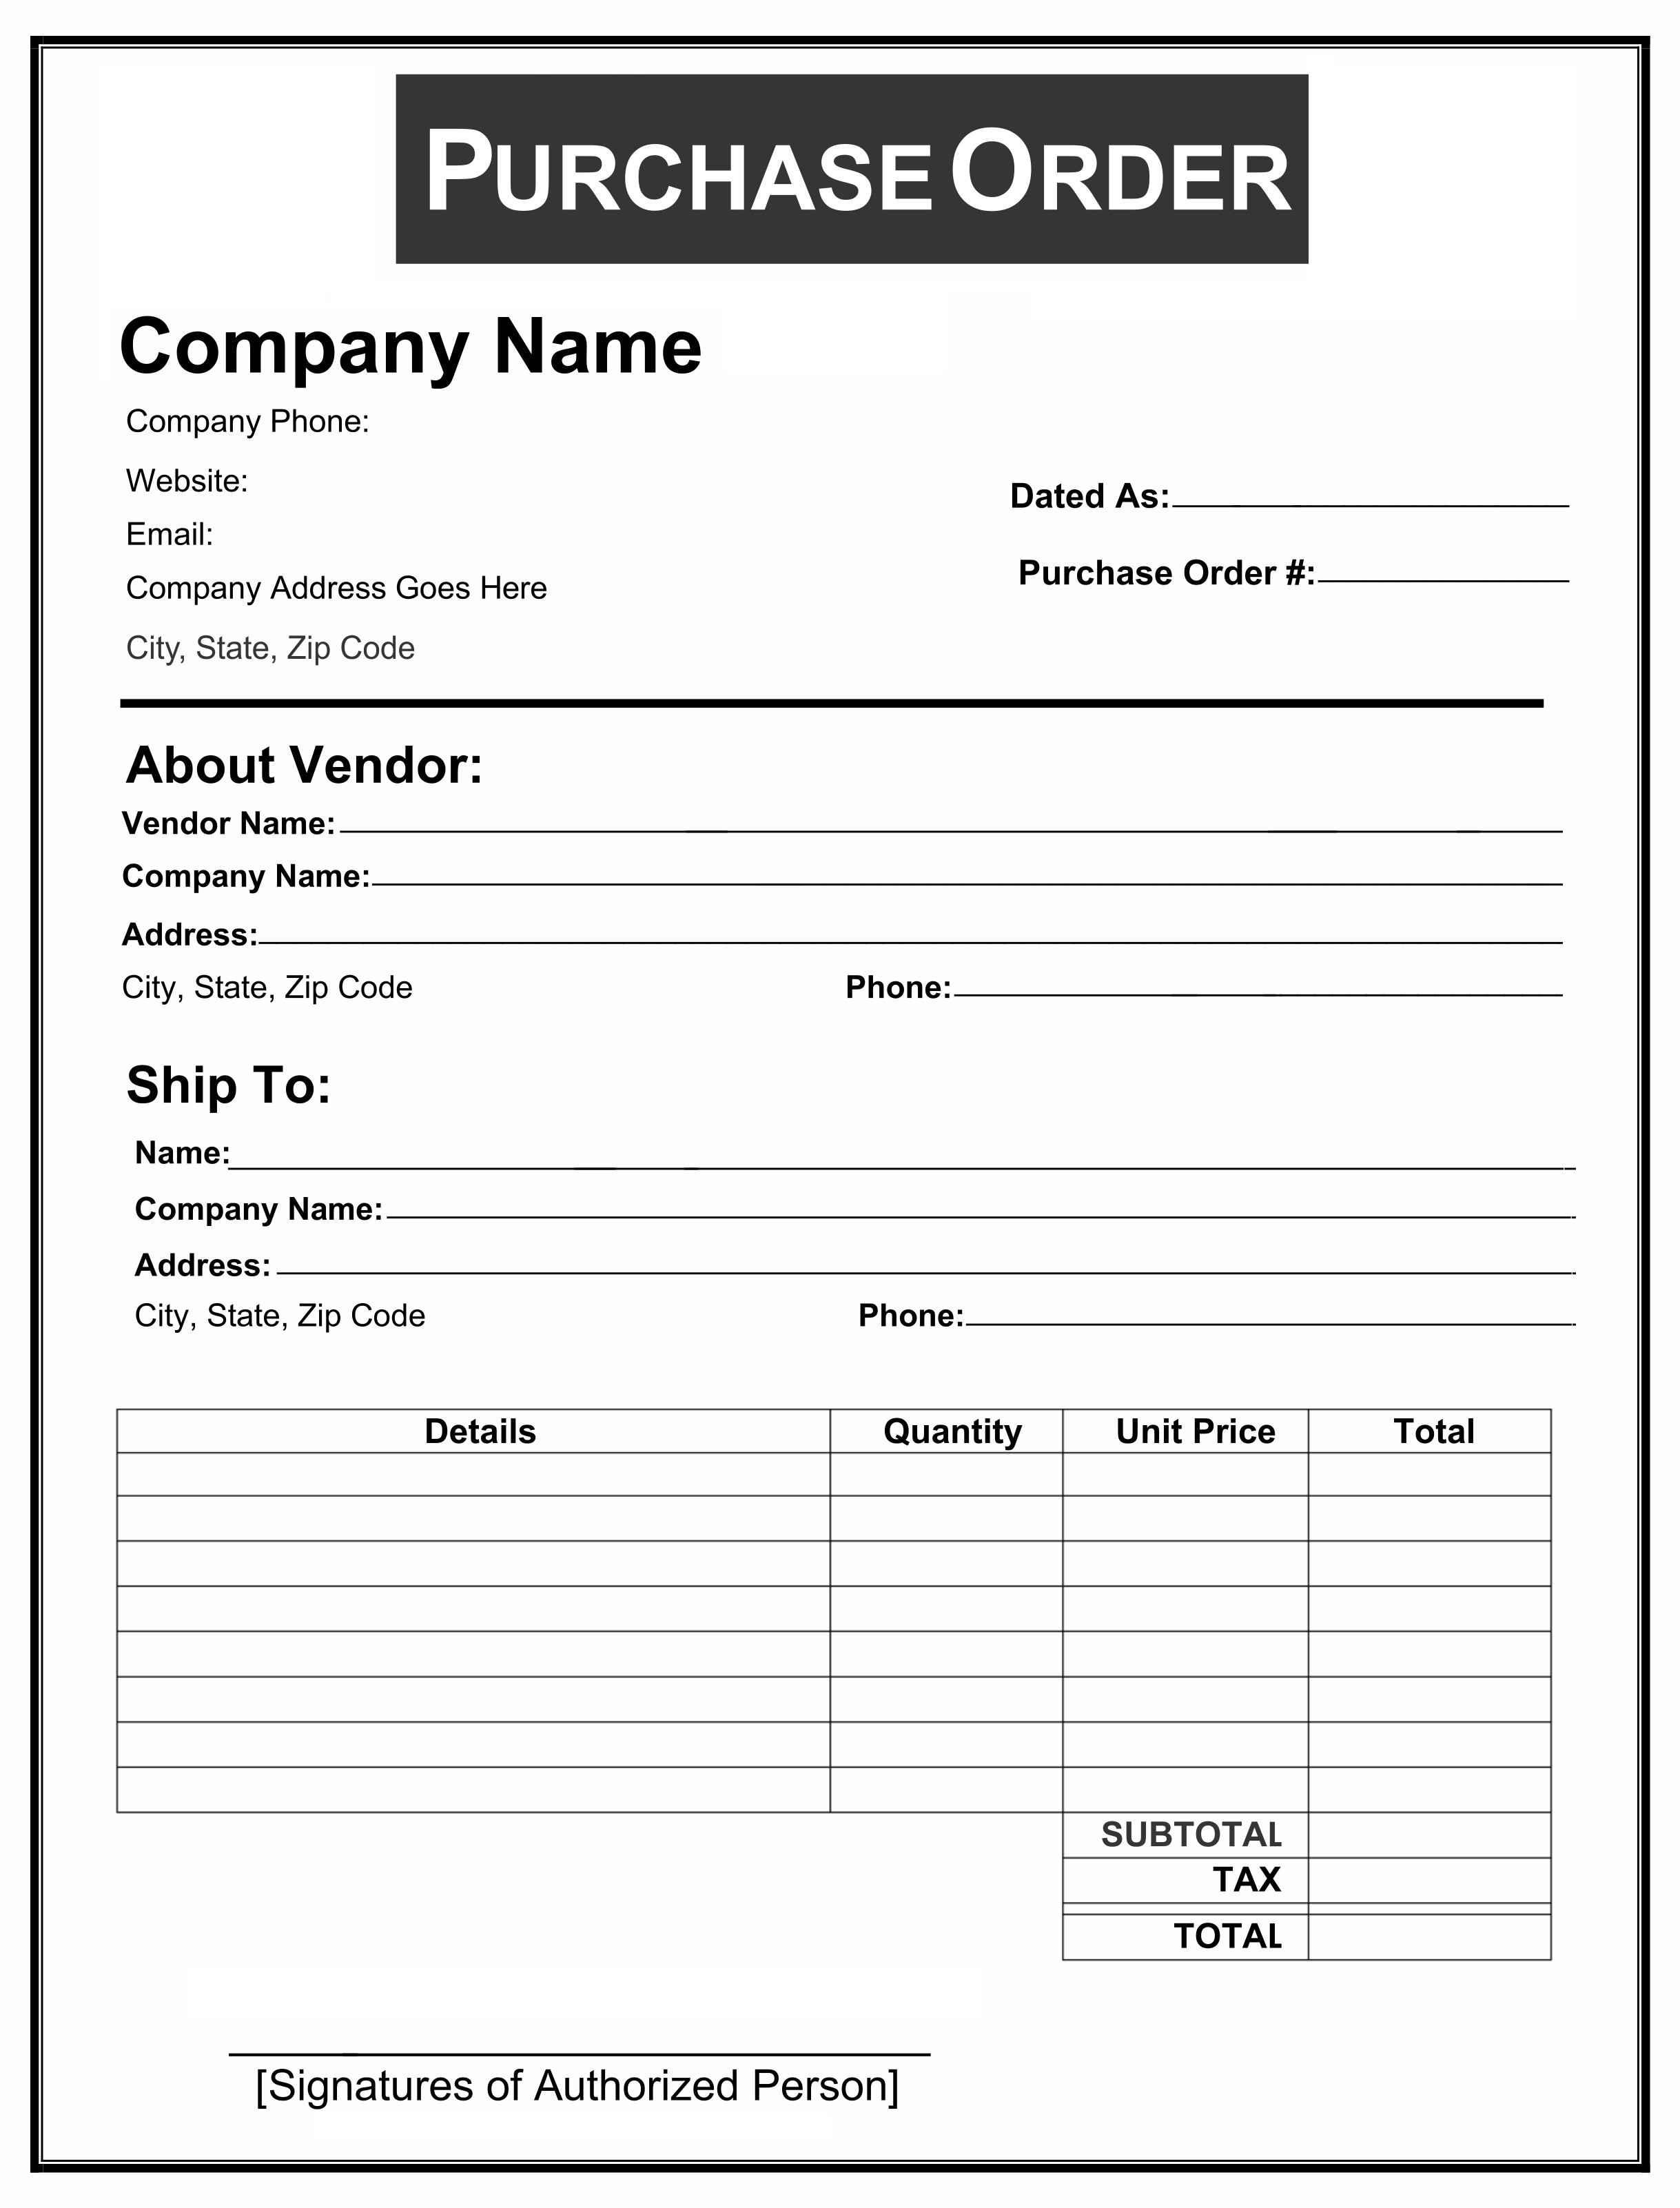 Carbonless Purchase Order Form Template 11.